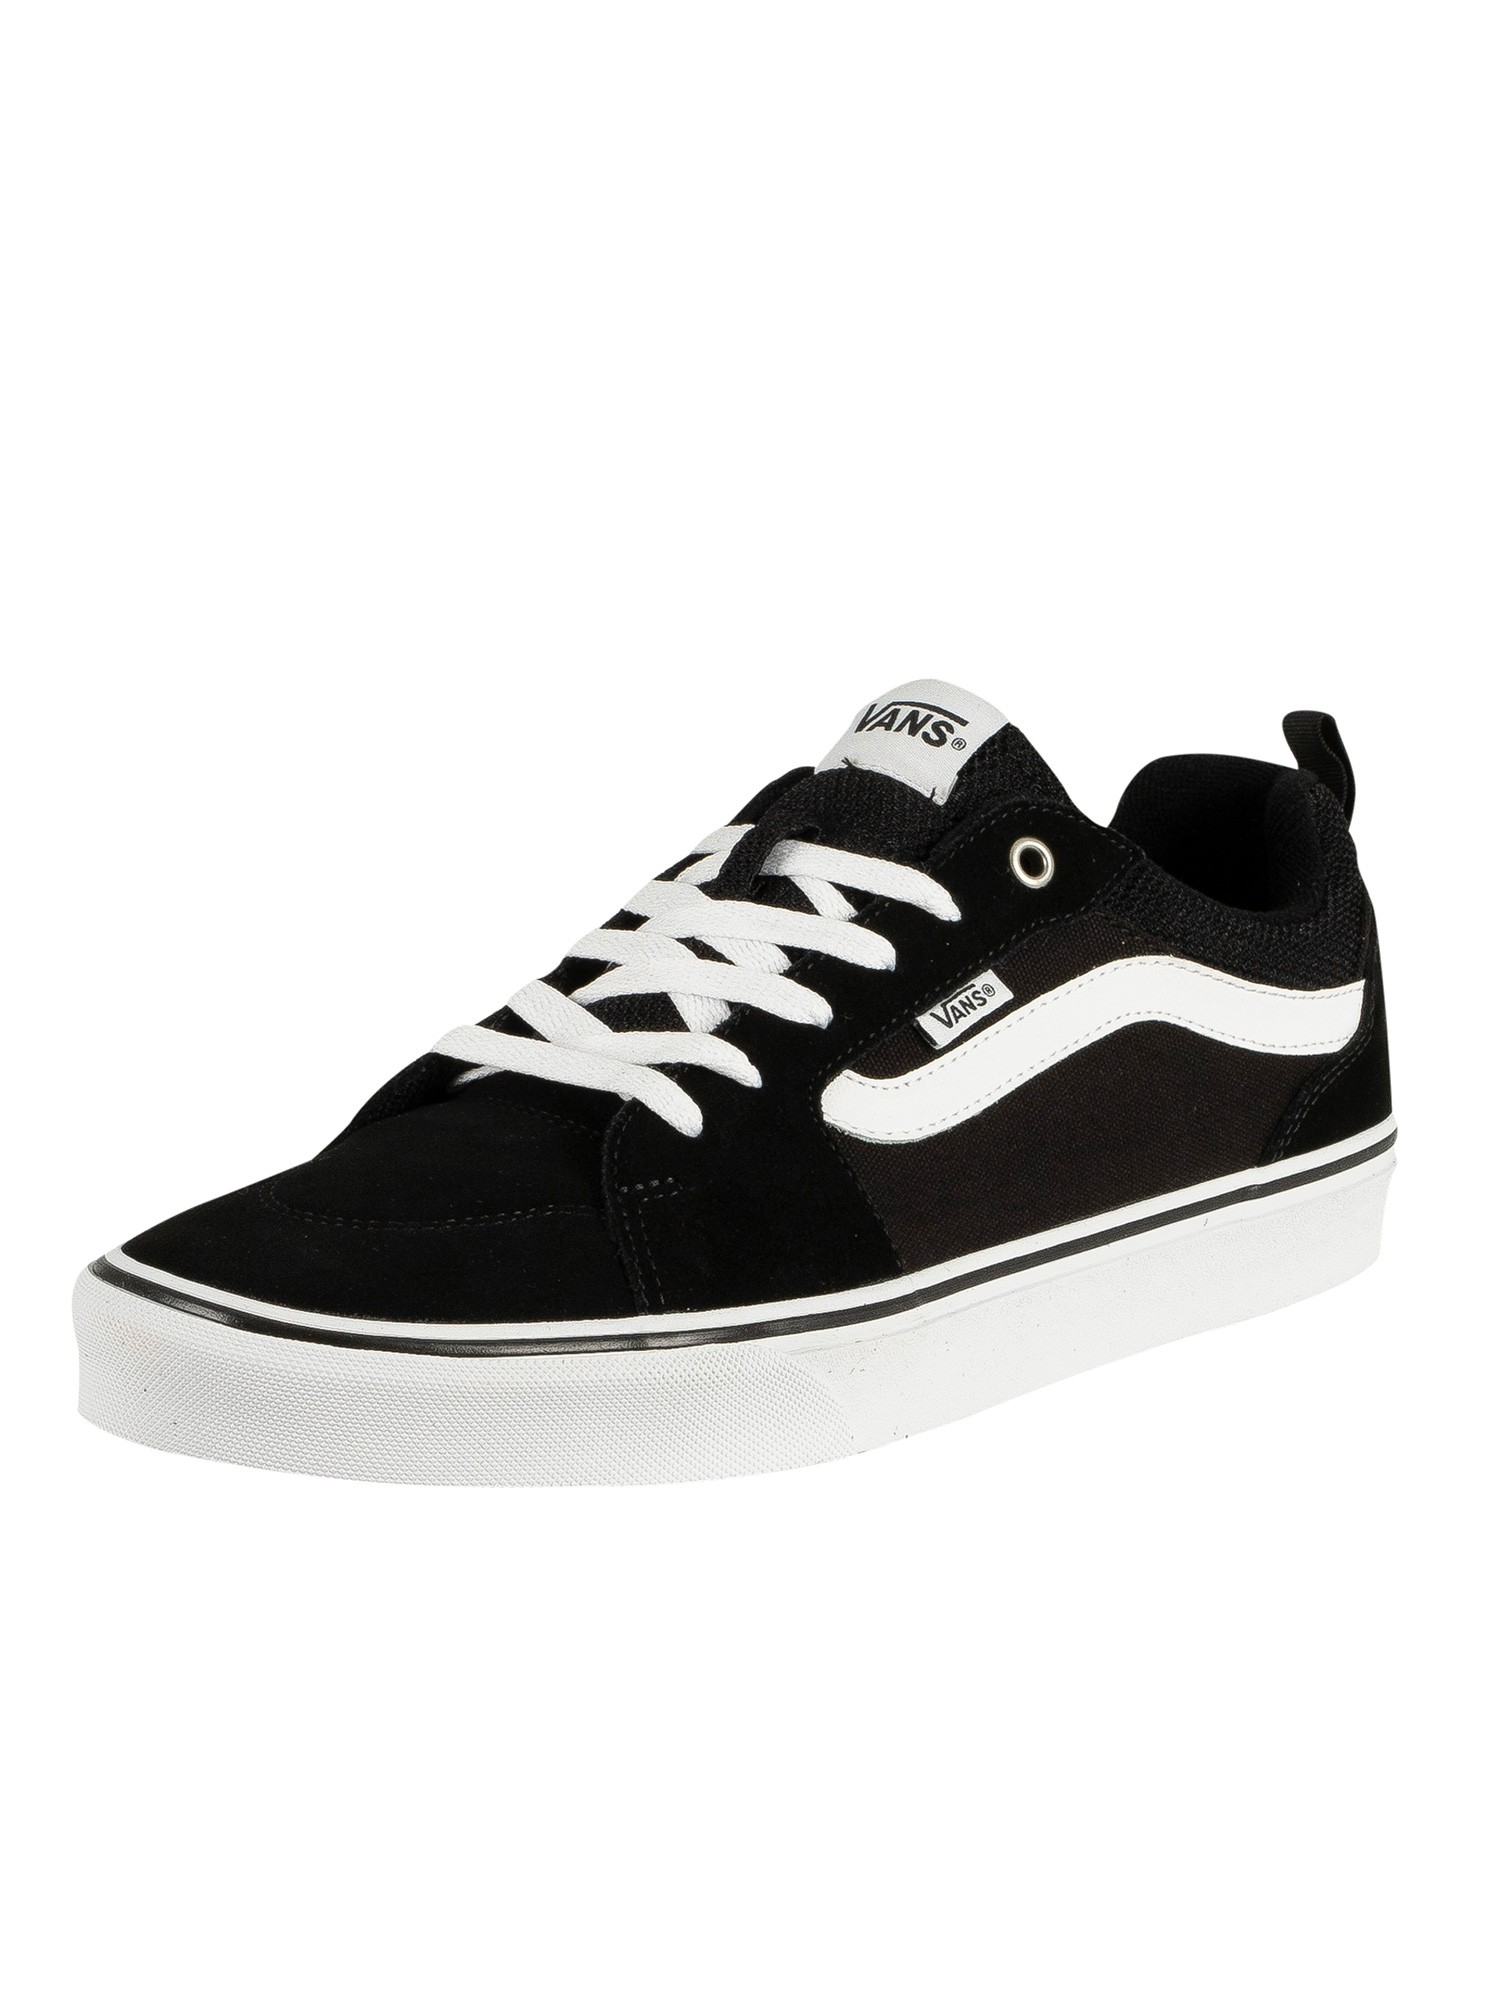 suede black and white vans